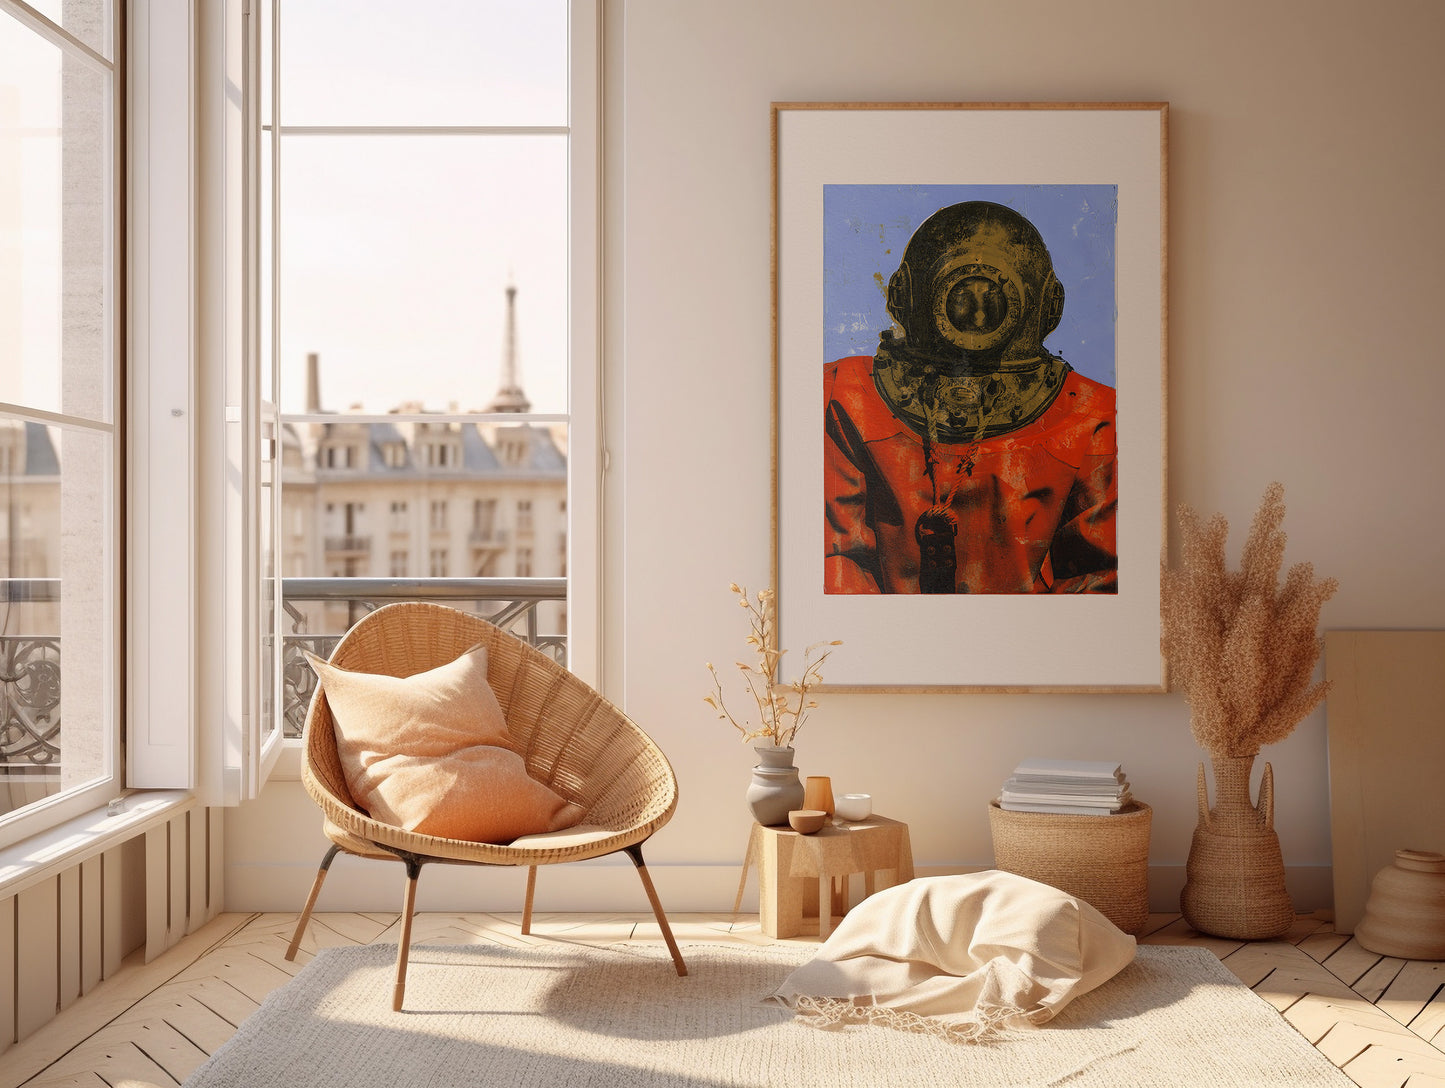 Painting Pop Art Wall Art from Greece | Duotone sponge diver from Kalymnos island, by George Tatakis - inside a room in Paris